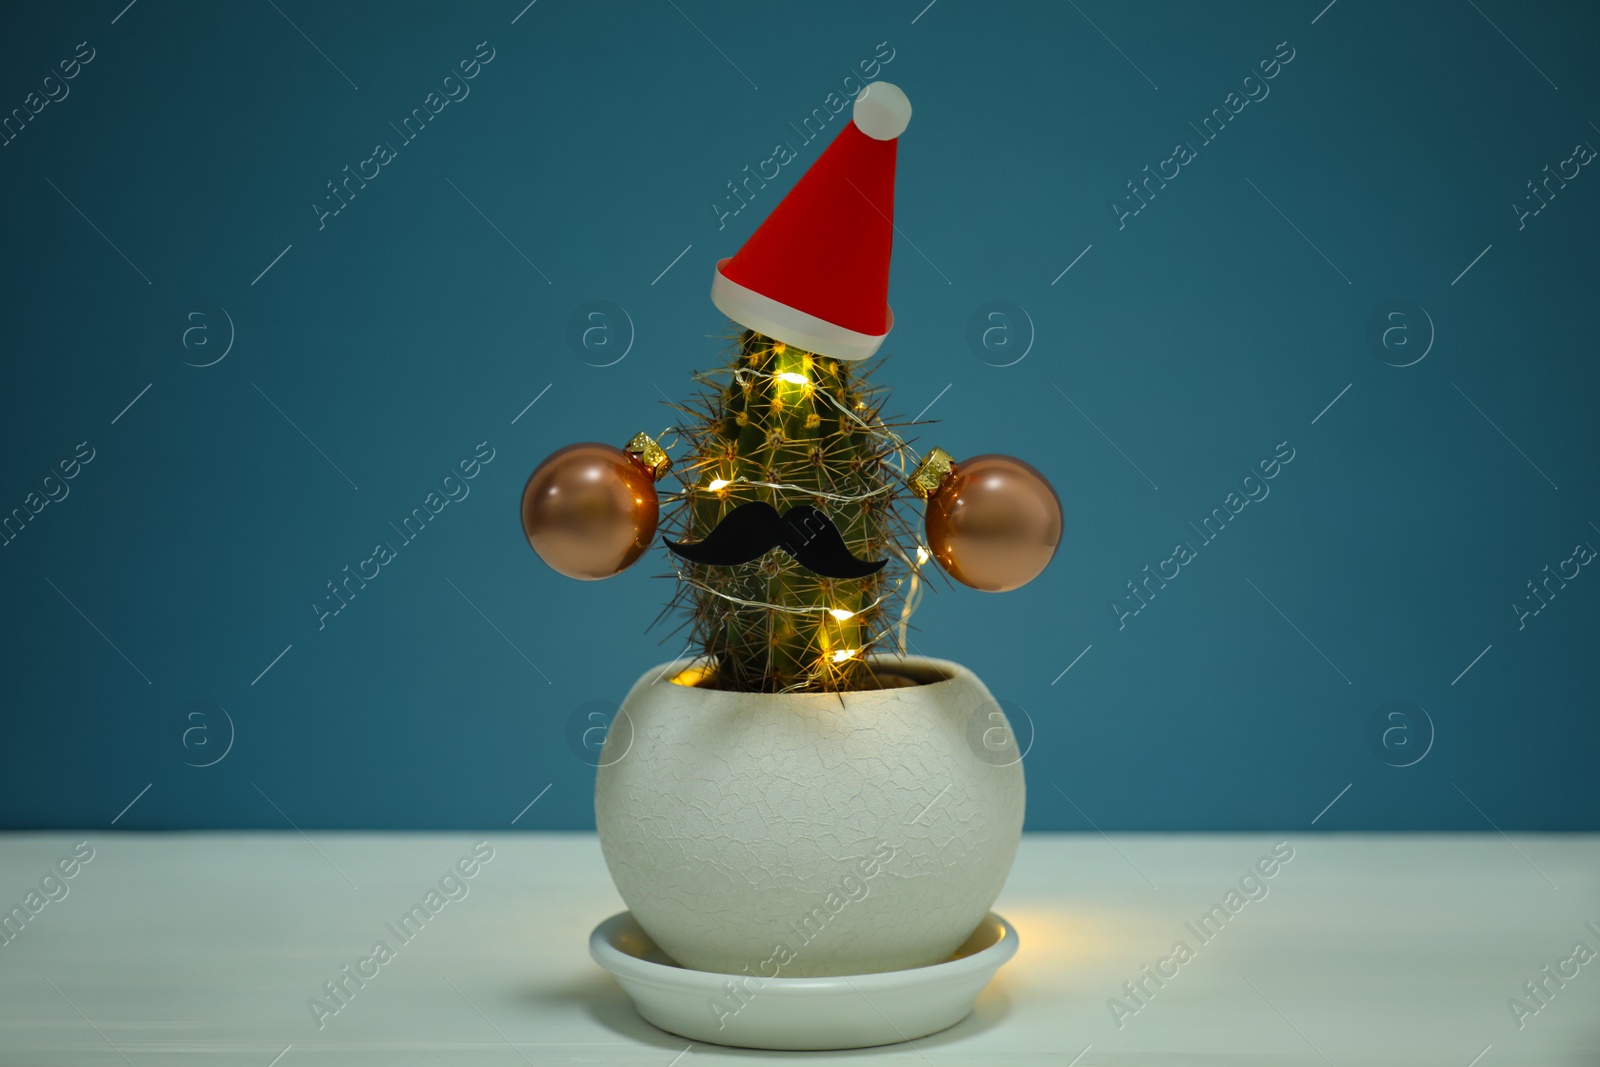 Photo of Cactus decorated with glowing fairy lights and santa hat on white table against blue background